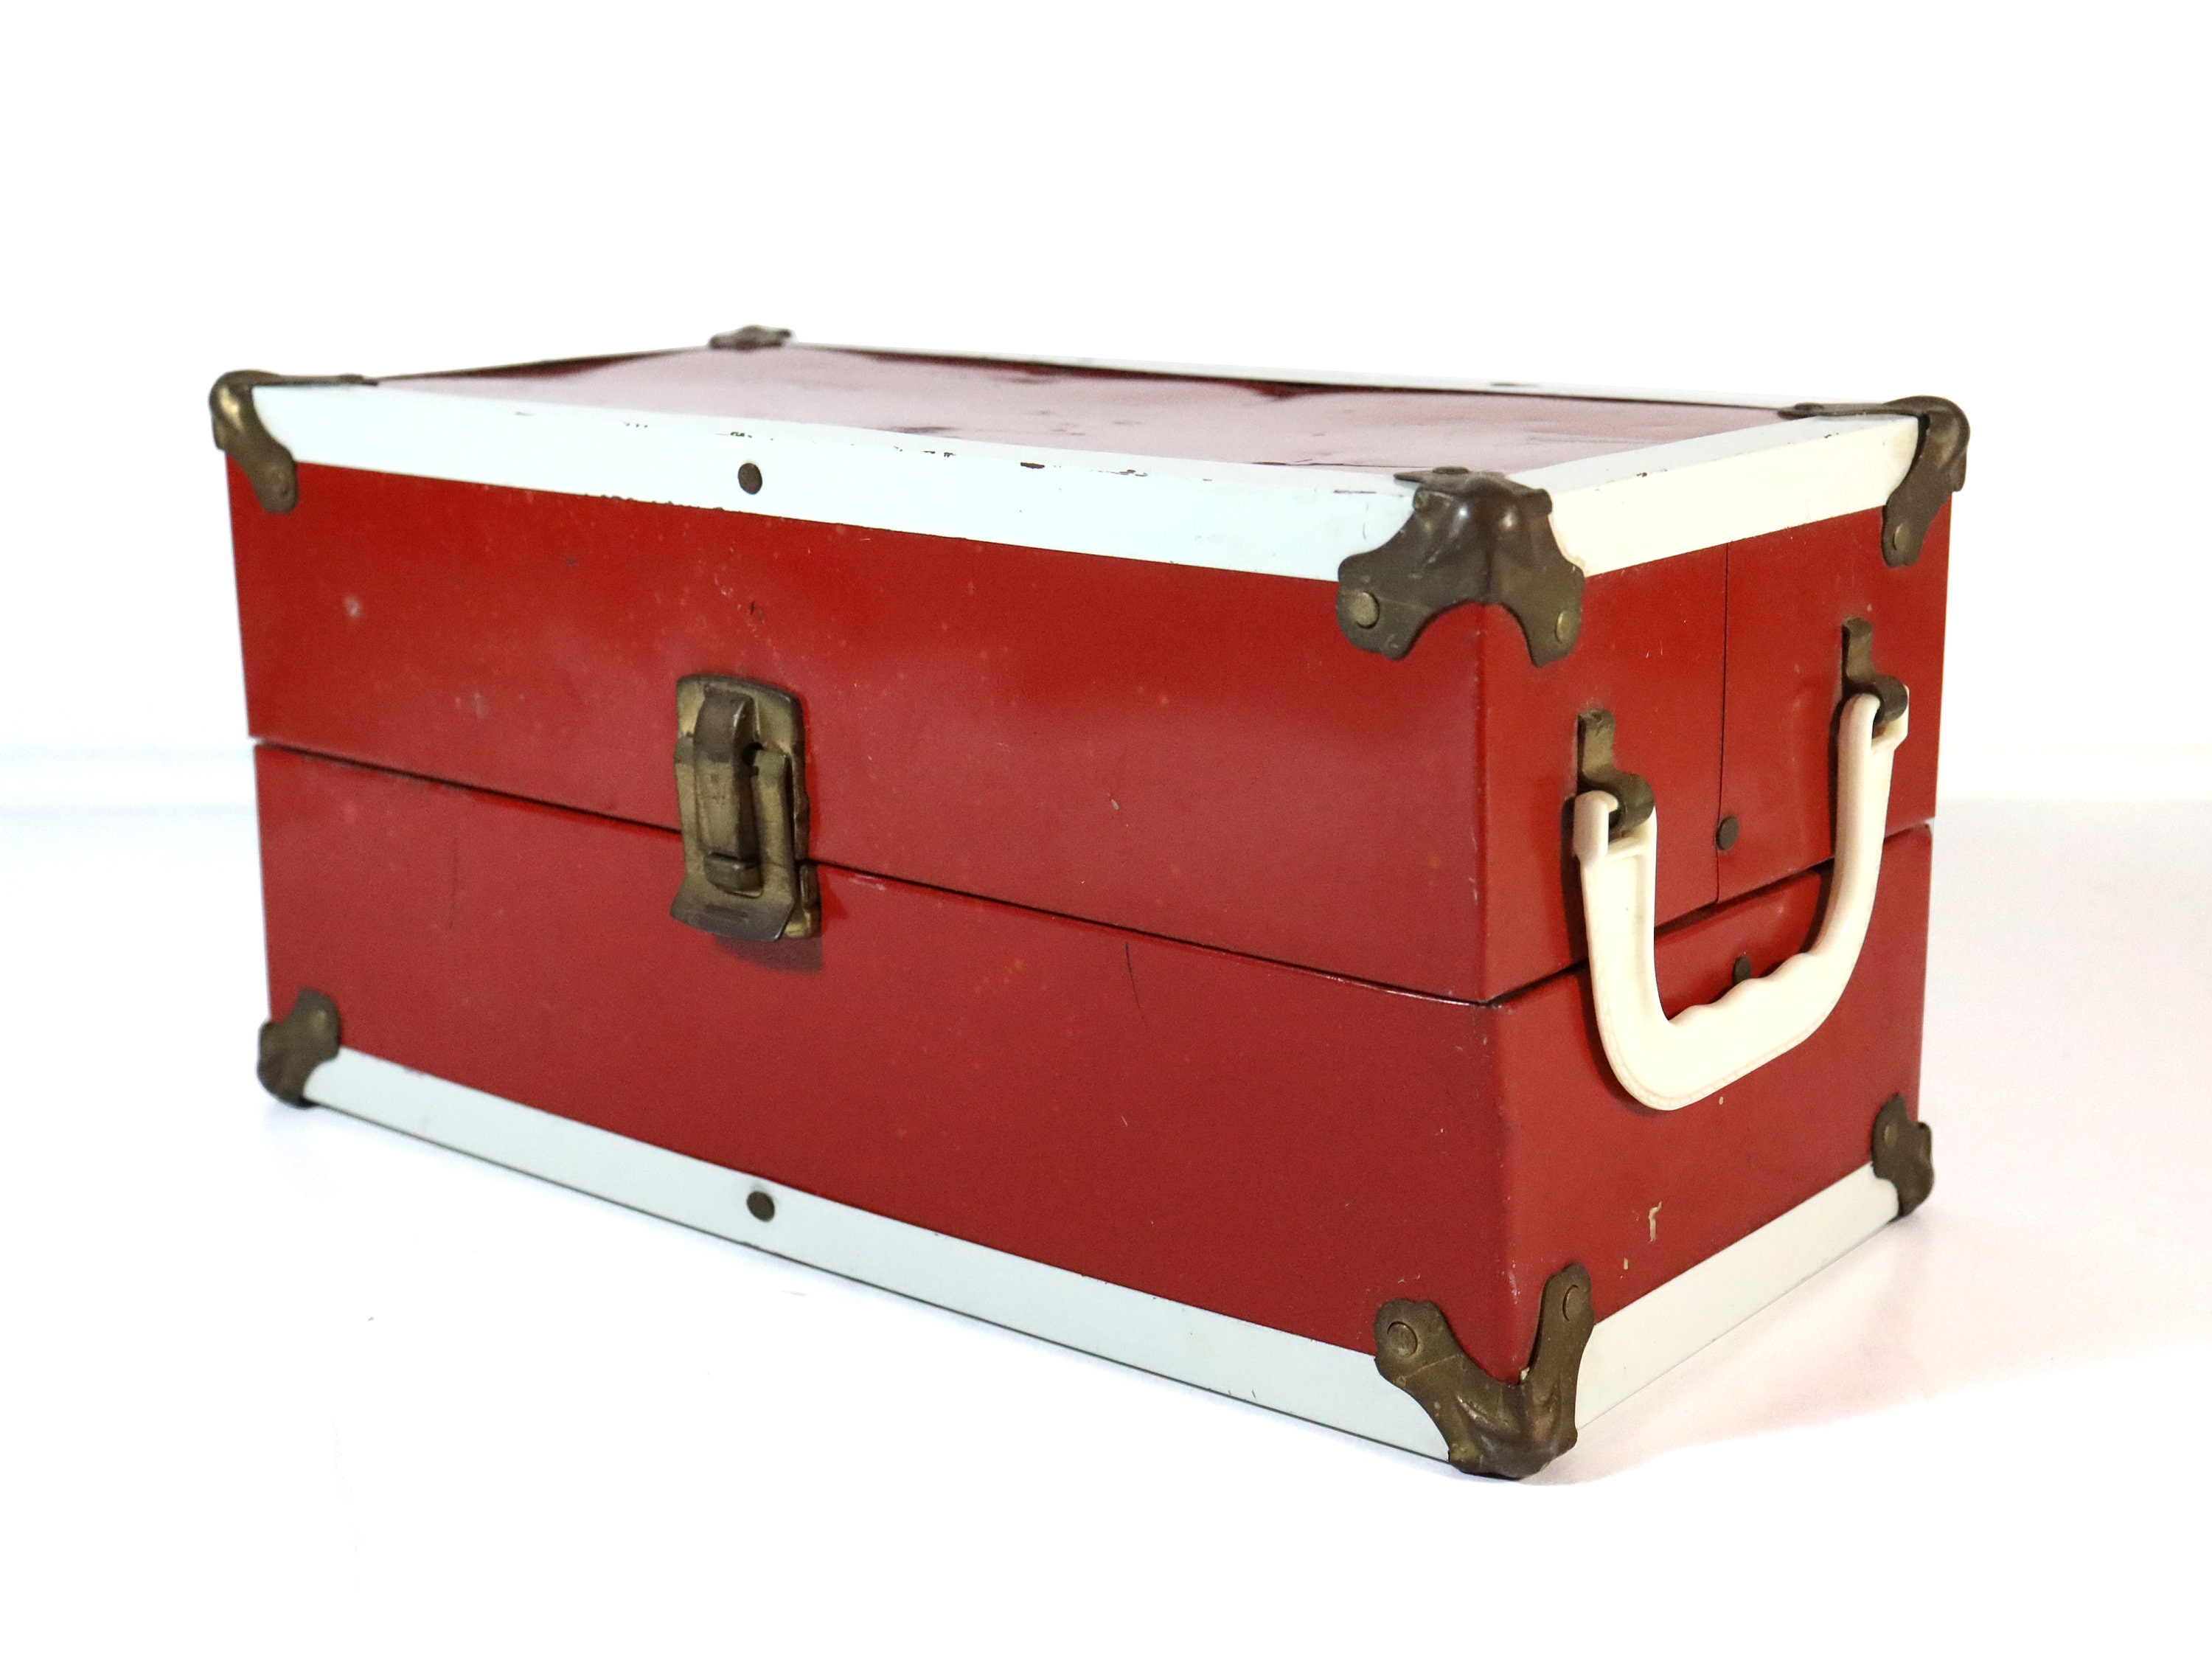 Vintage Red Buxton Train Case Small Trunk Travel Case Red 